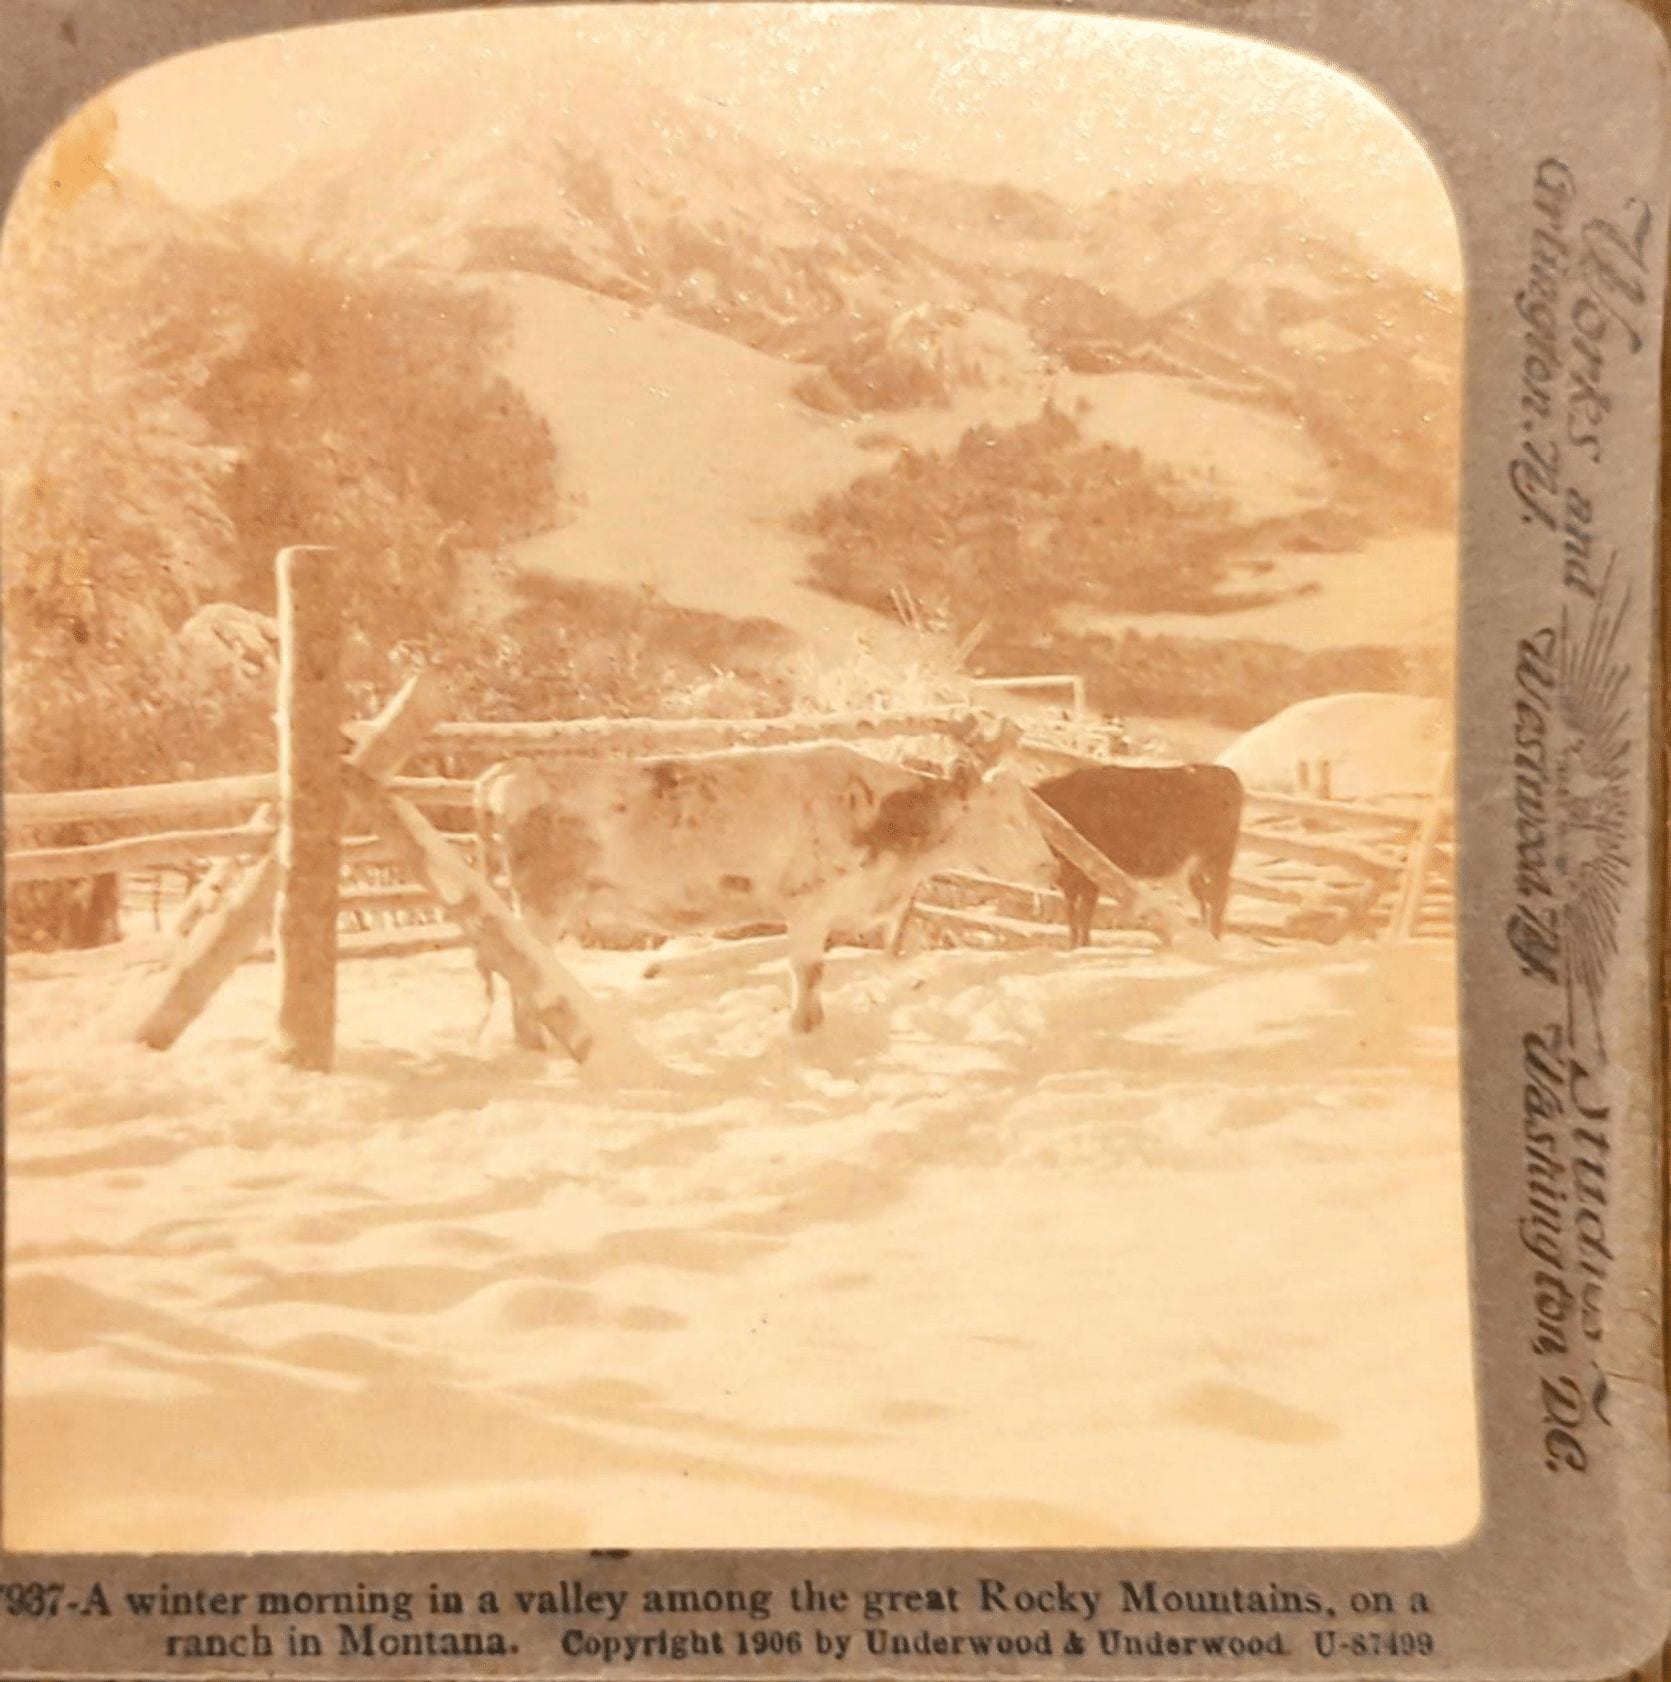 A black and white photograph of two cows standing outside with snow on the ground.